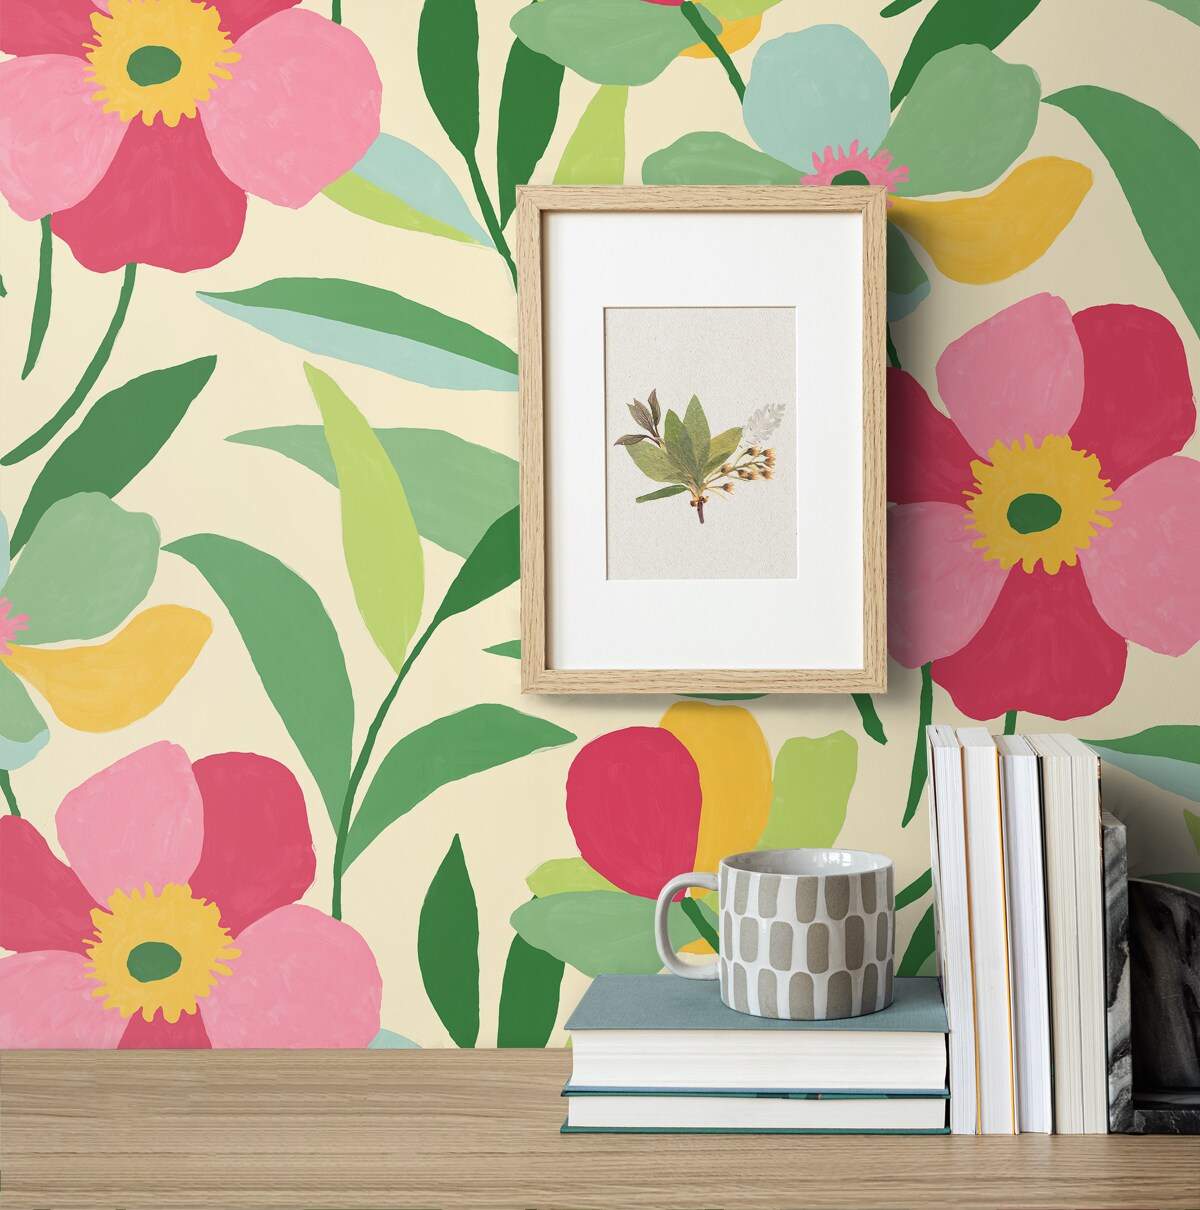 NextWall 30.75-sq ft Pink and Kelly Green Vinyl Floral Self